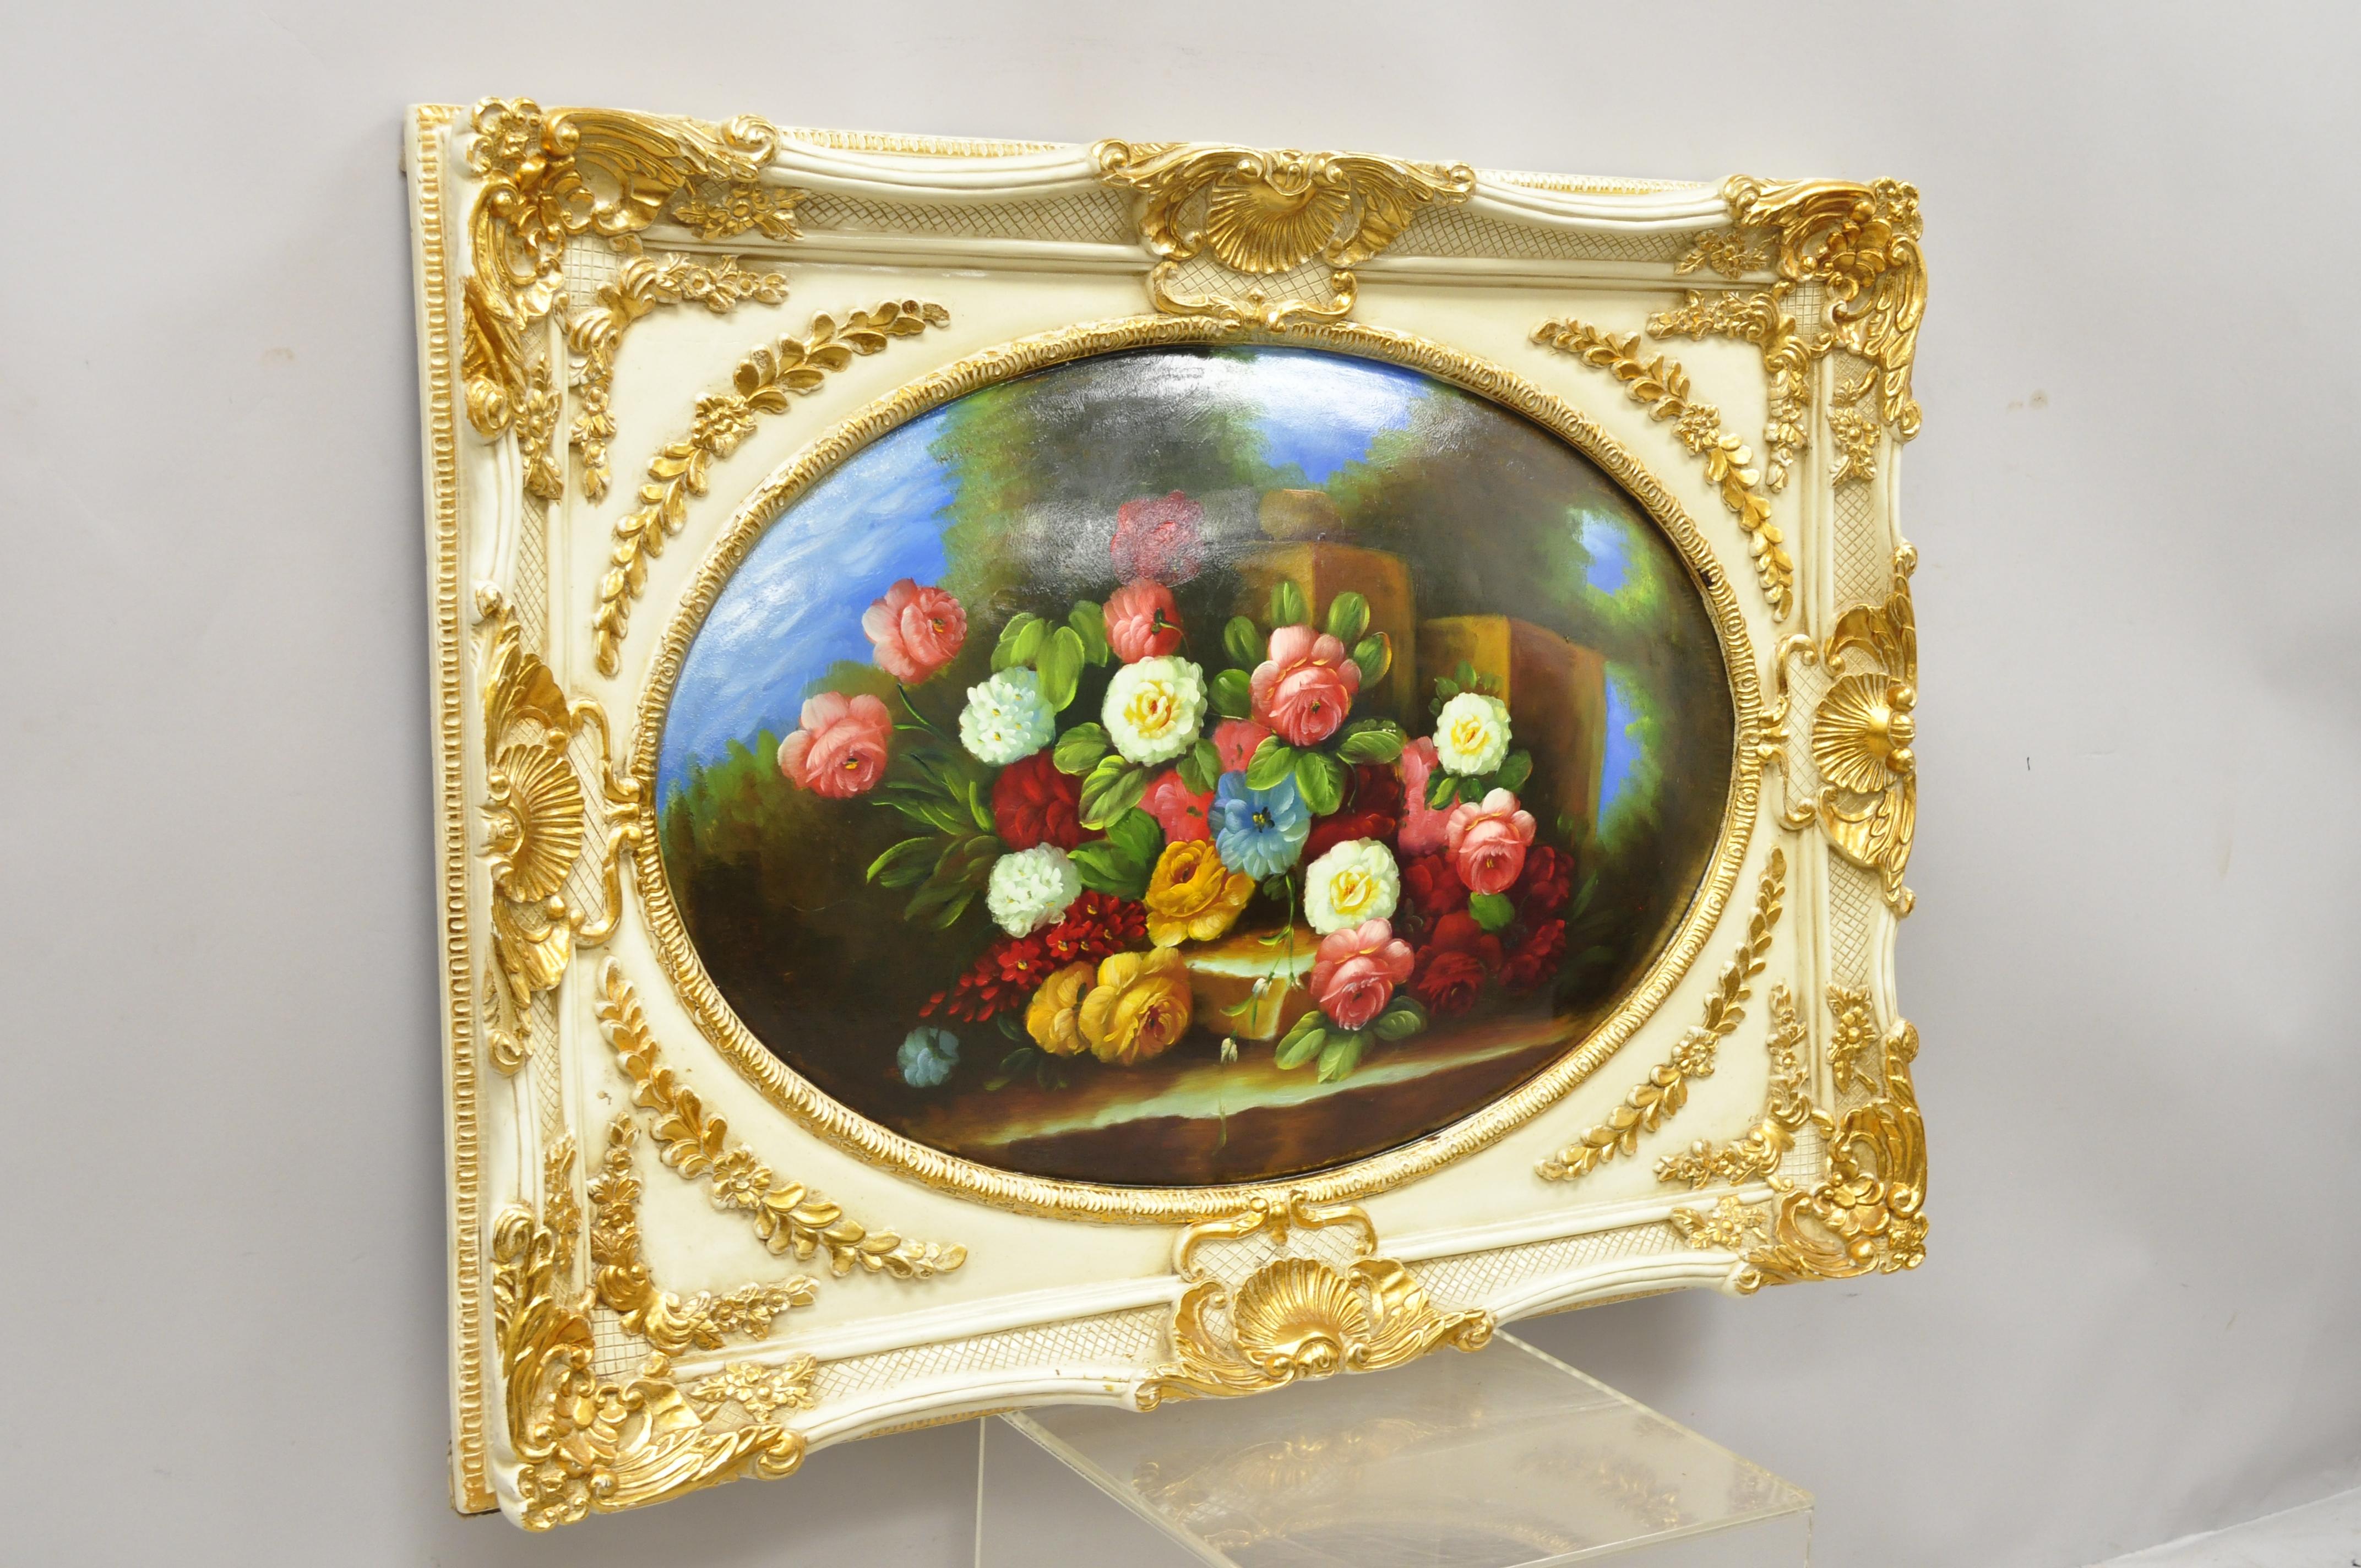 Vintage Italian Rococo style flower still life wall art painting by Mirtex Trading. Item features ornate carved frame, dome/bubble form still life painting, original label, very nice vintage item, great style and form, circa late 20th